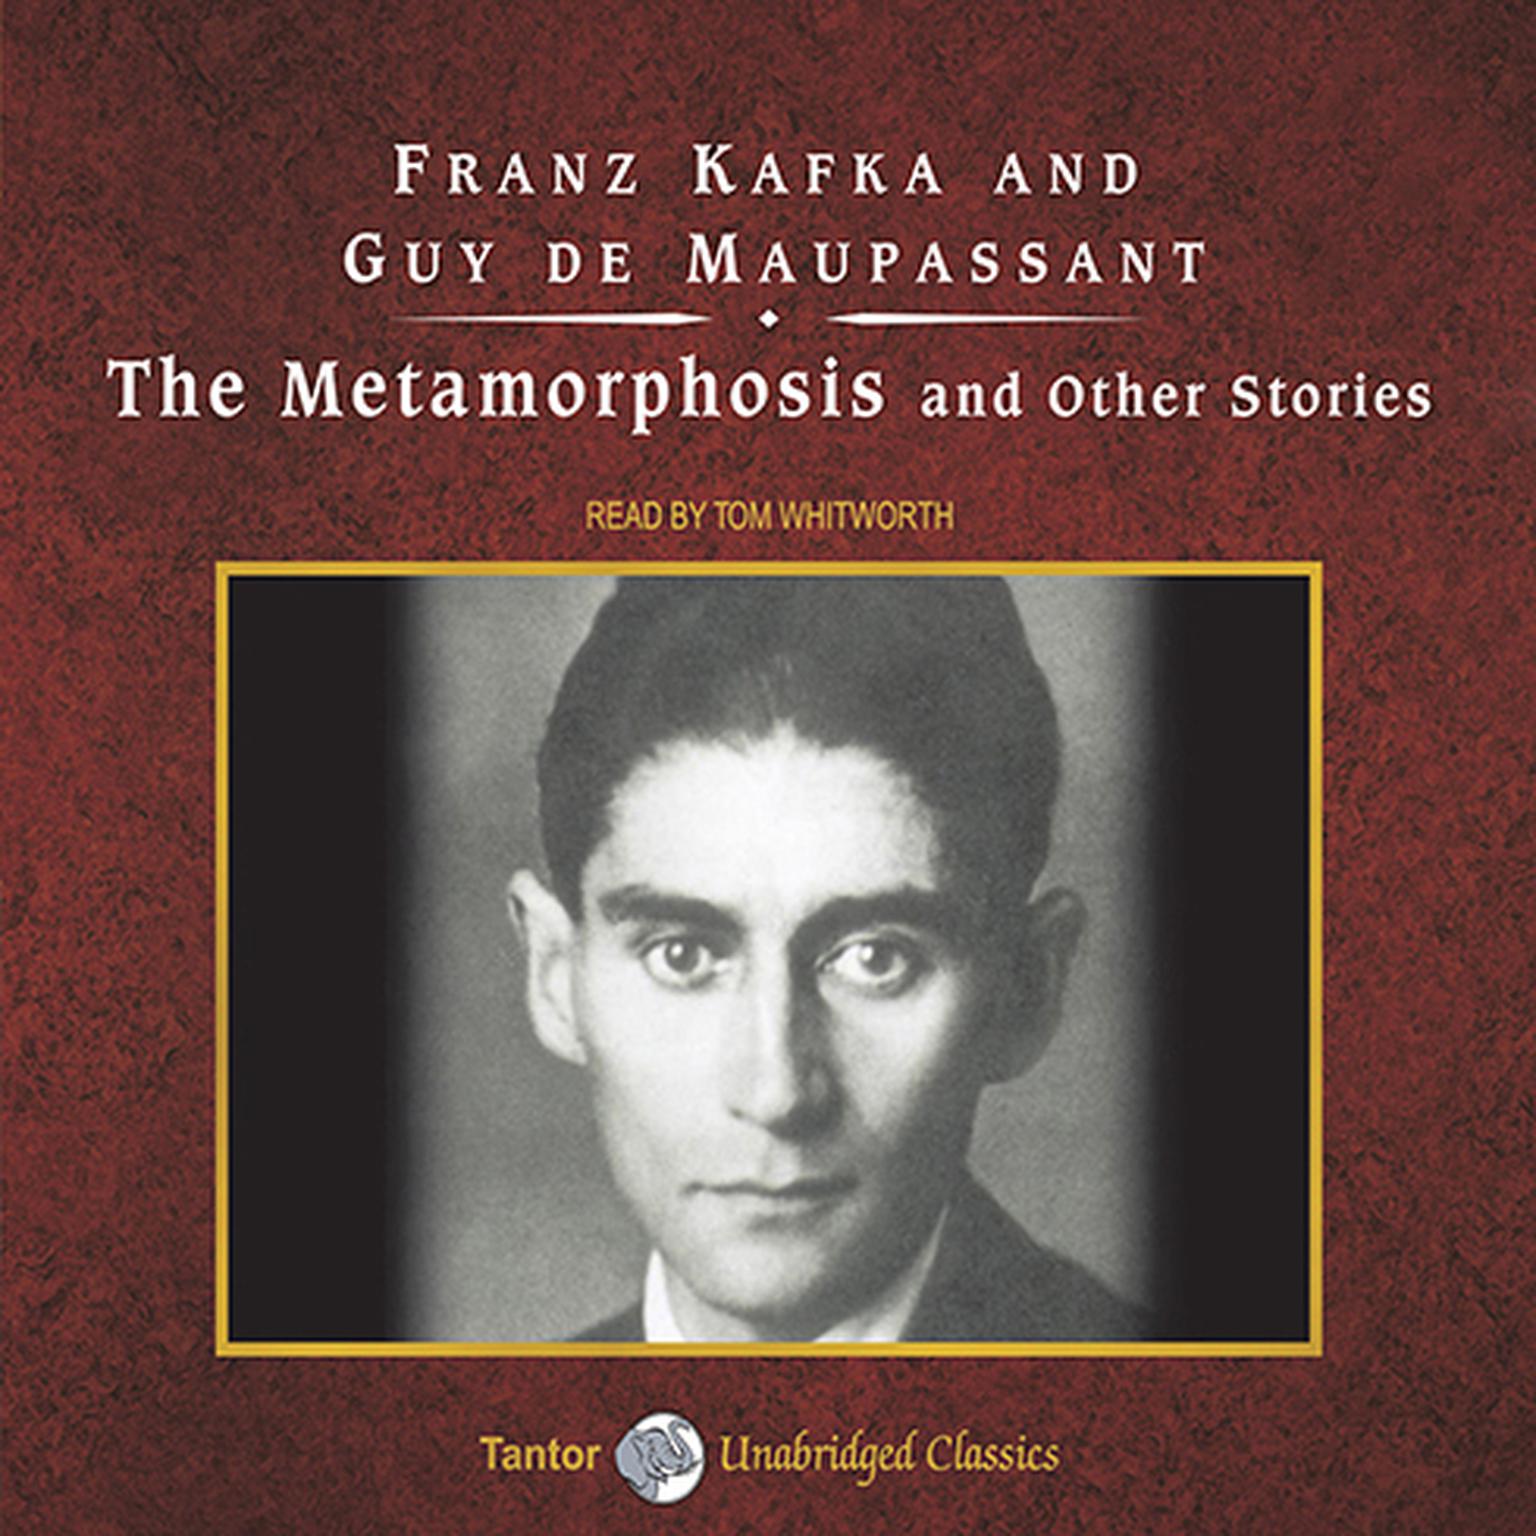 The Metamorphosis and Other Stories, with eBook Audiobook, by Franz Kafka